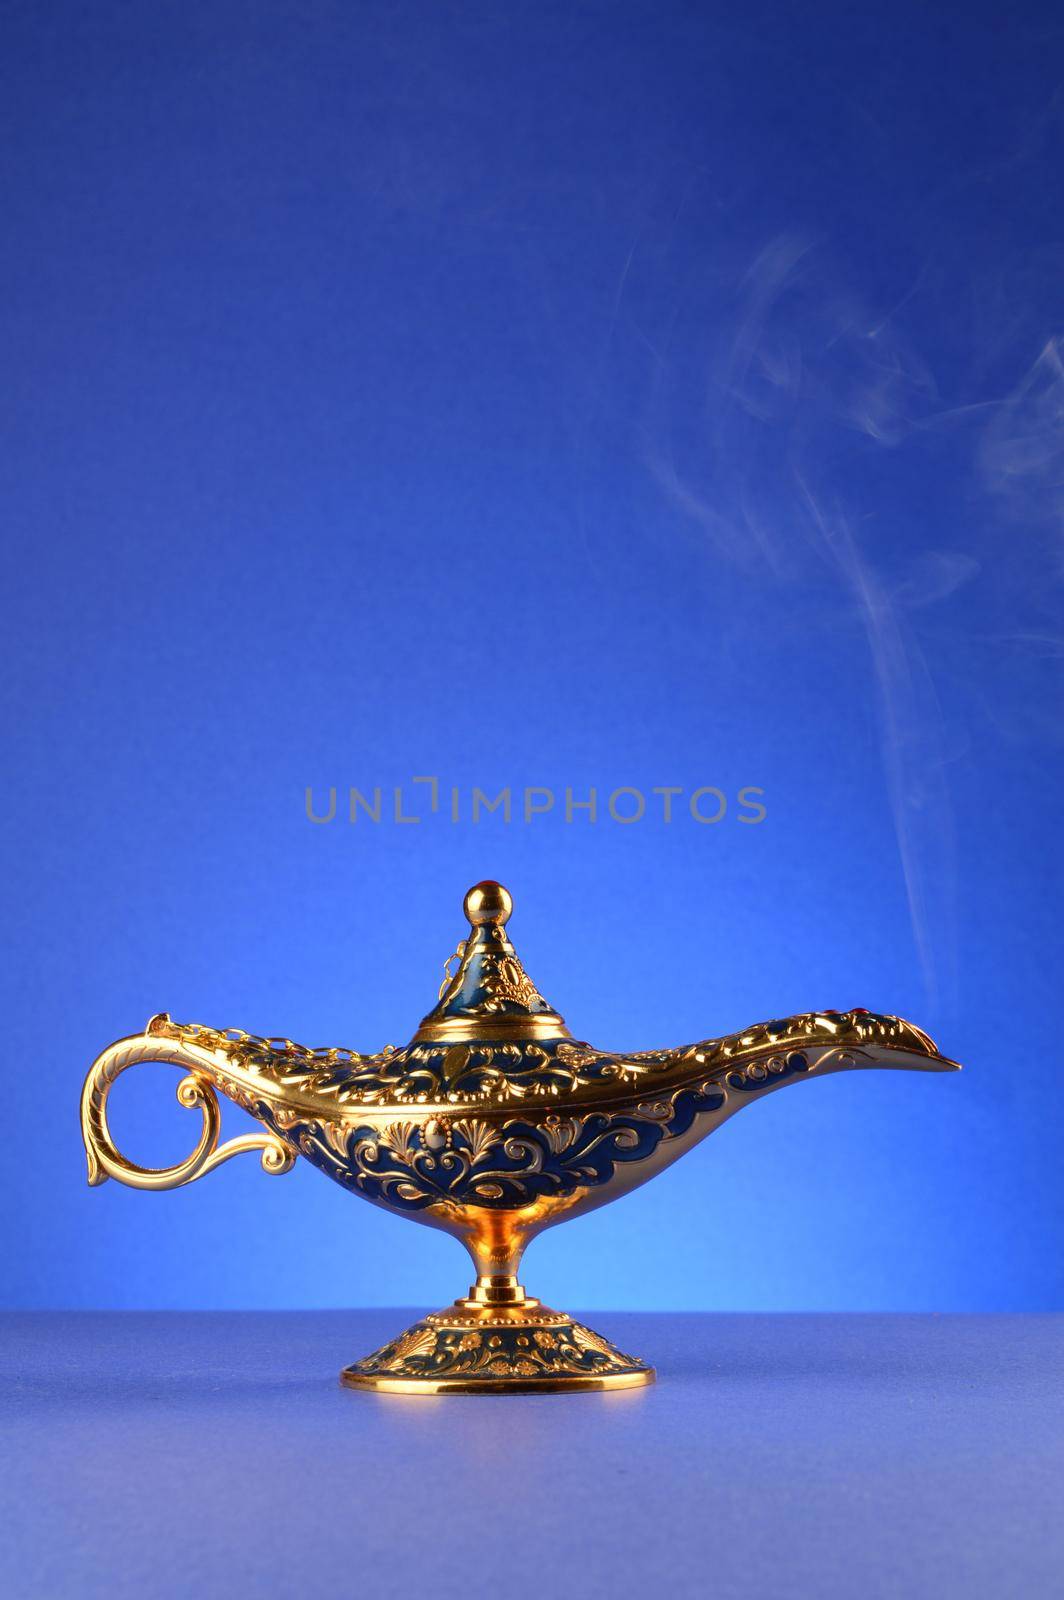 A magical lamp with a smoke trail over a blue gradient background.